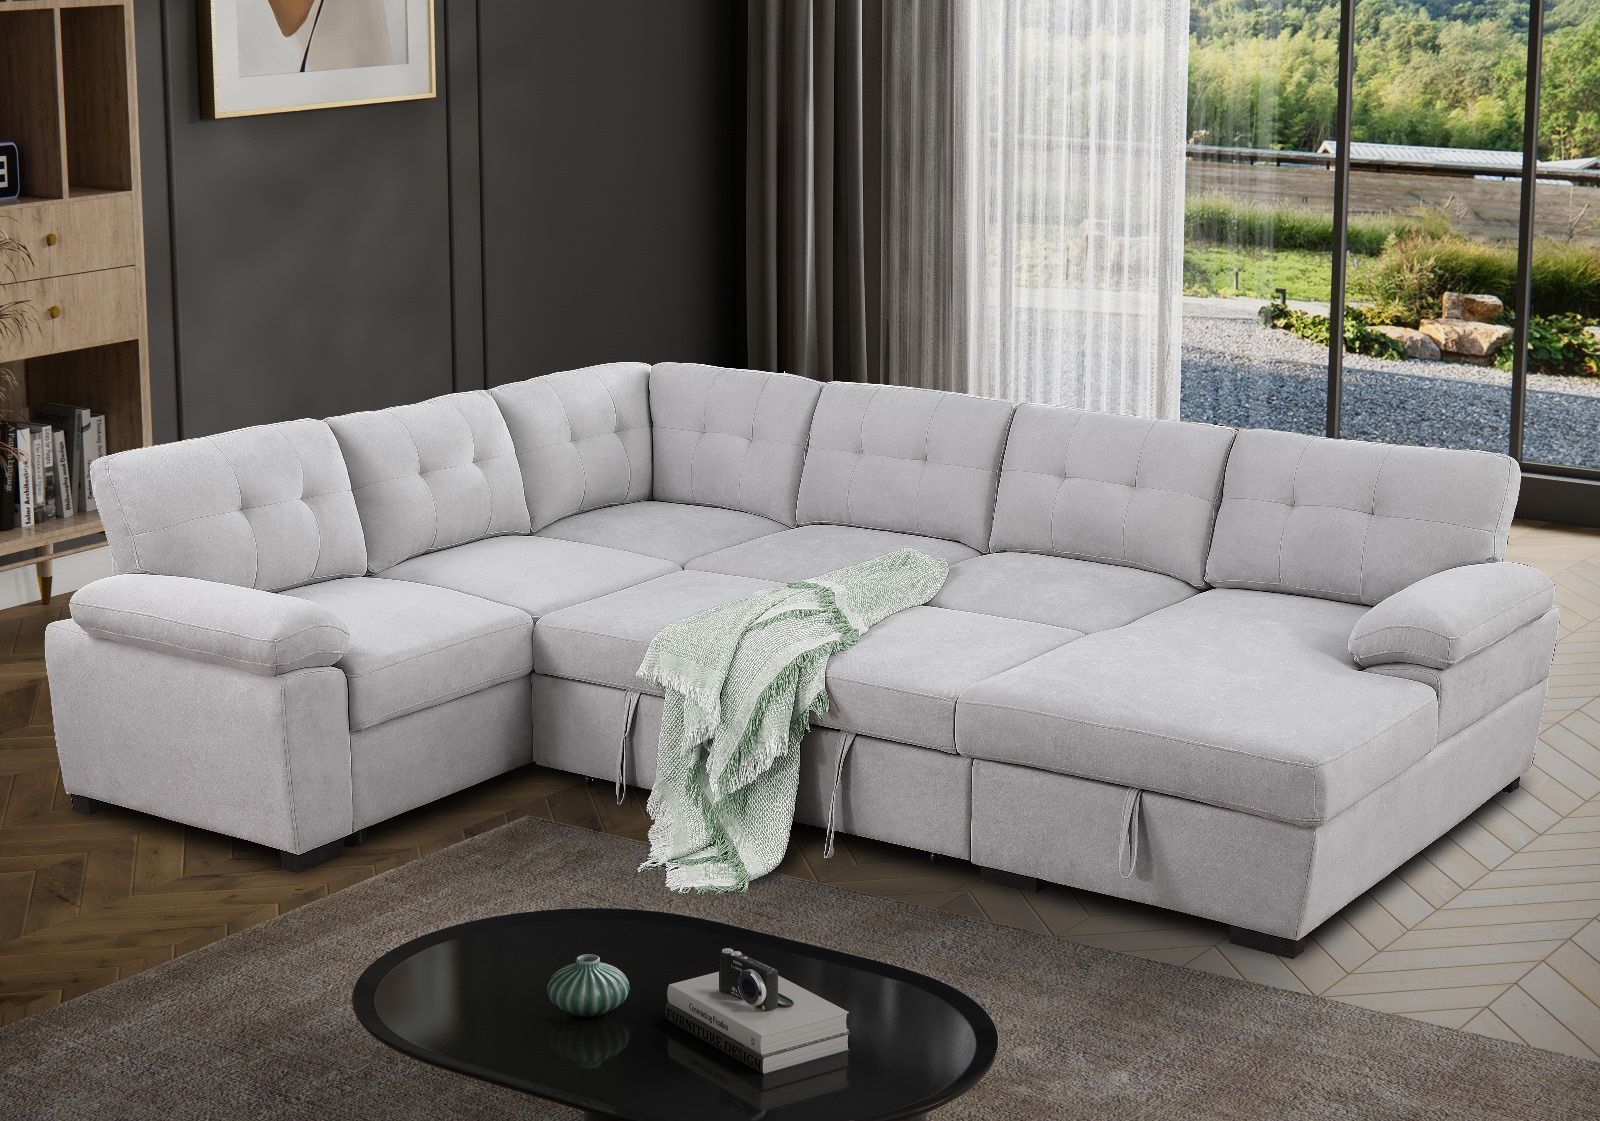 New! Premium Sectional Sofa With Pull Out Bed, Sofabed, Sectional Sofa Bed, Sectional Sofa With Storage Chaise,sleeper Sofa,Sectional Couch,Sectionals